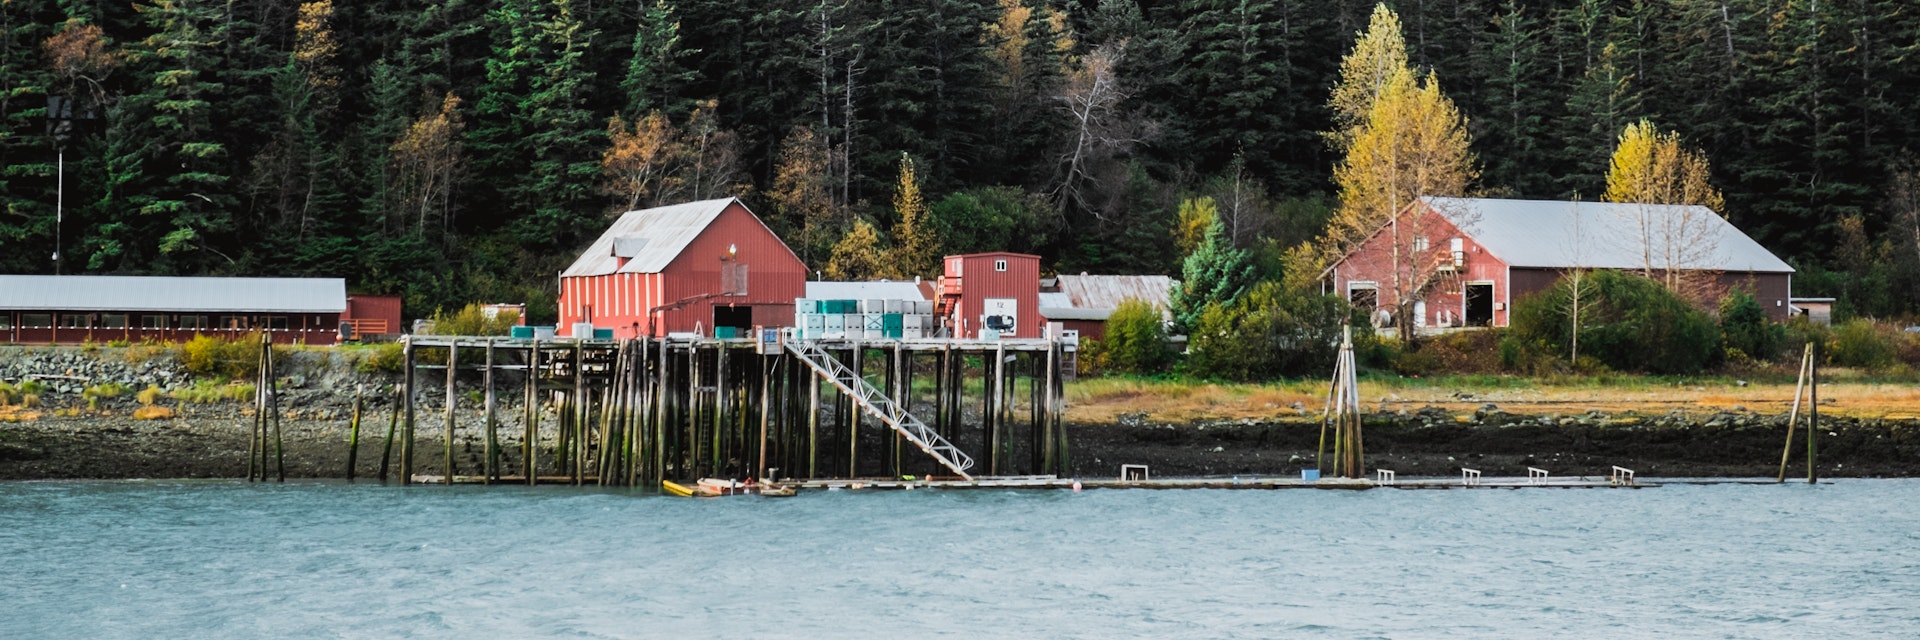 Cannery located in bay of Pacific Ocean is a part of famous fishing village Haines in Alaska in background with mountains and glaciers covered with snow during warm autumn sunny day